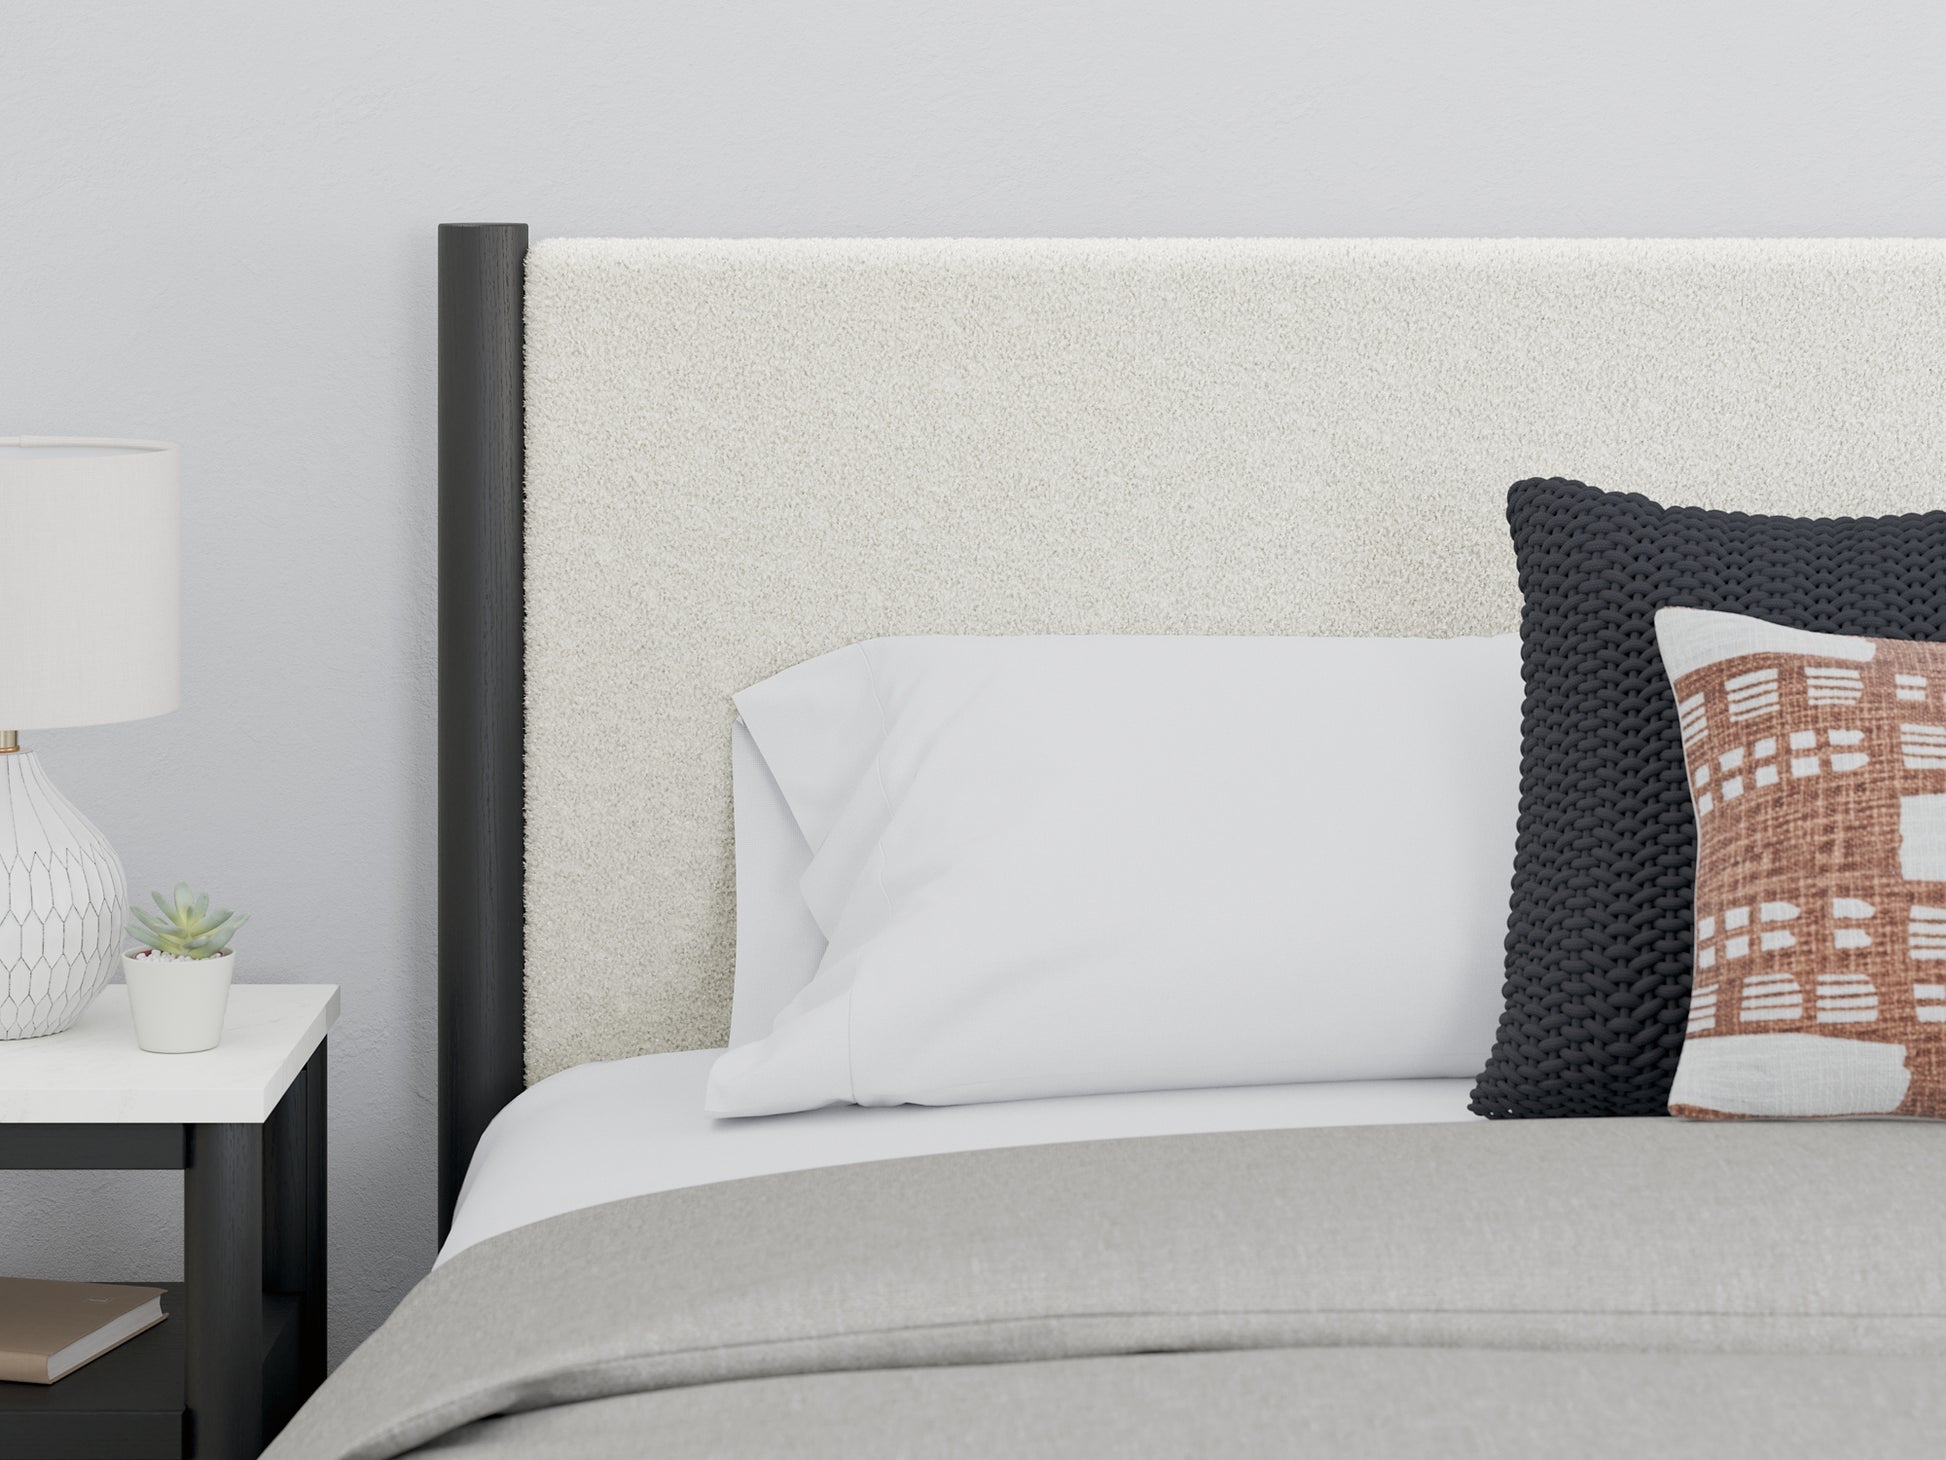 Cadmori King Upholstered Panel Bed Signature Design by Ashley®